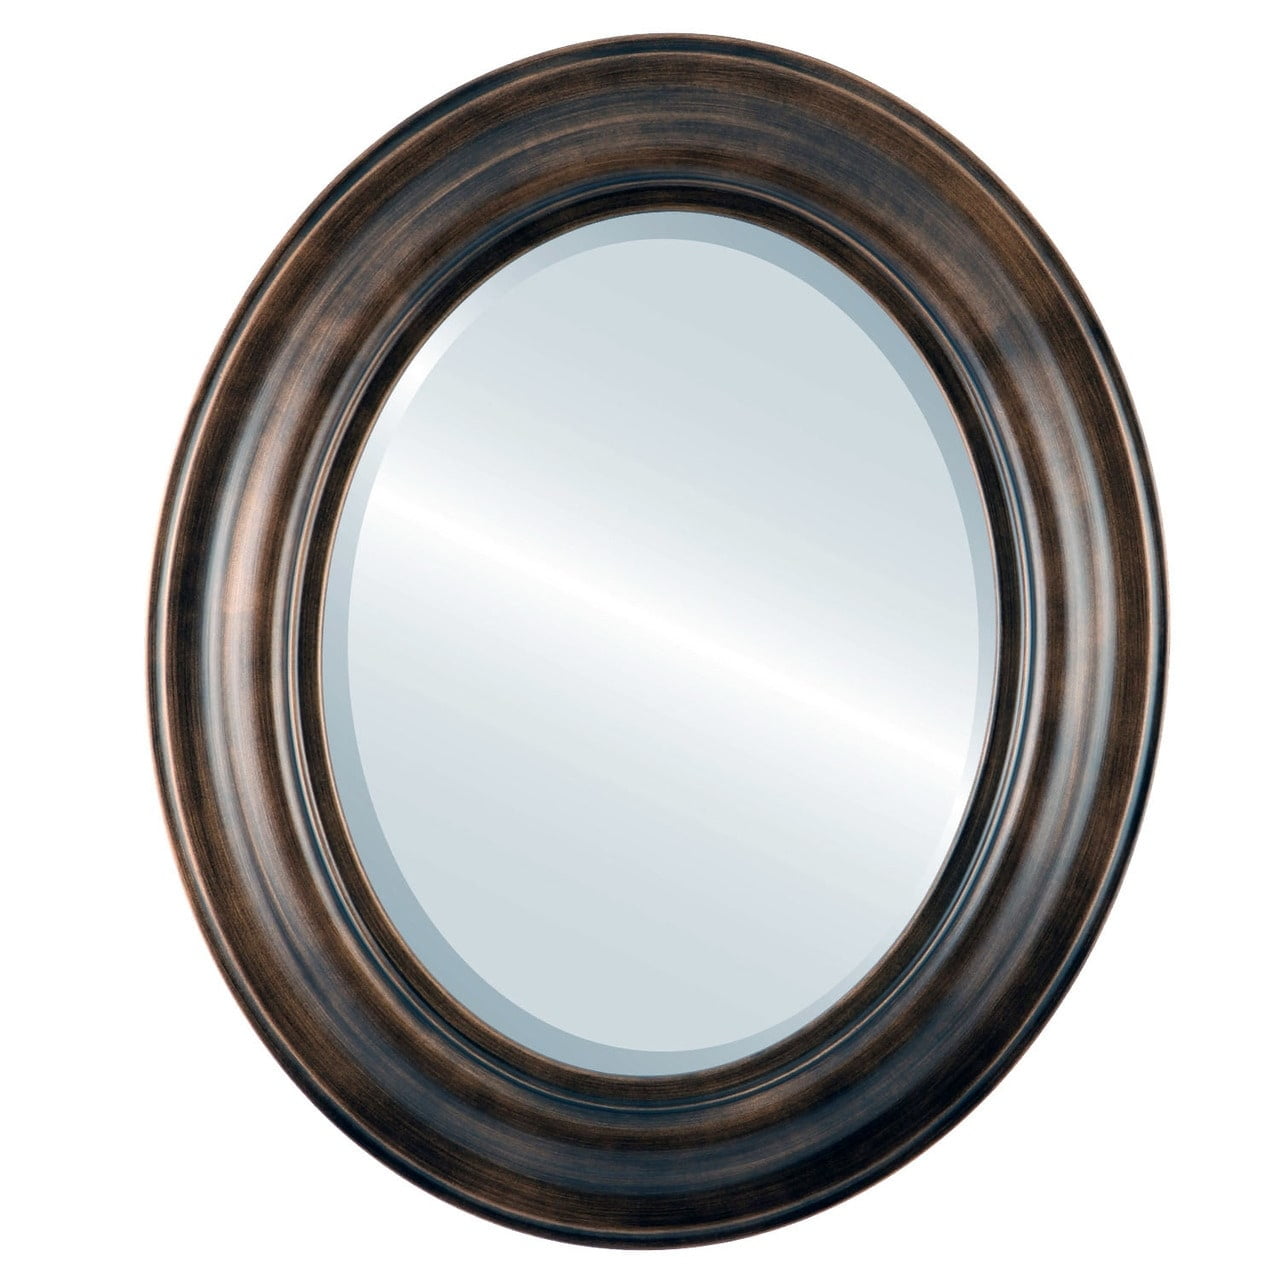 OVALCREST by The OVALCREST Mirror Store Lancaster Framed Oval Mirror in  Rubbed Bronze Antique Bronze 23x29